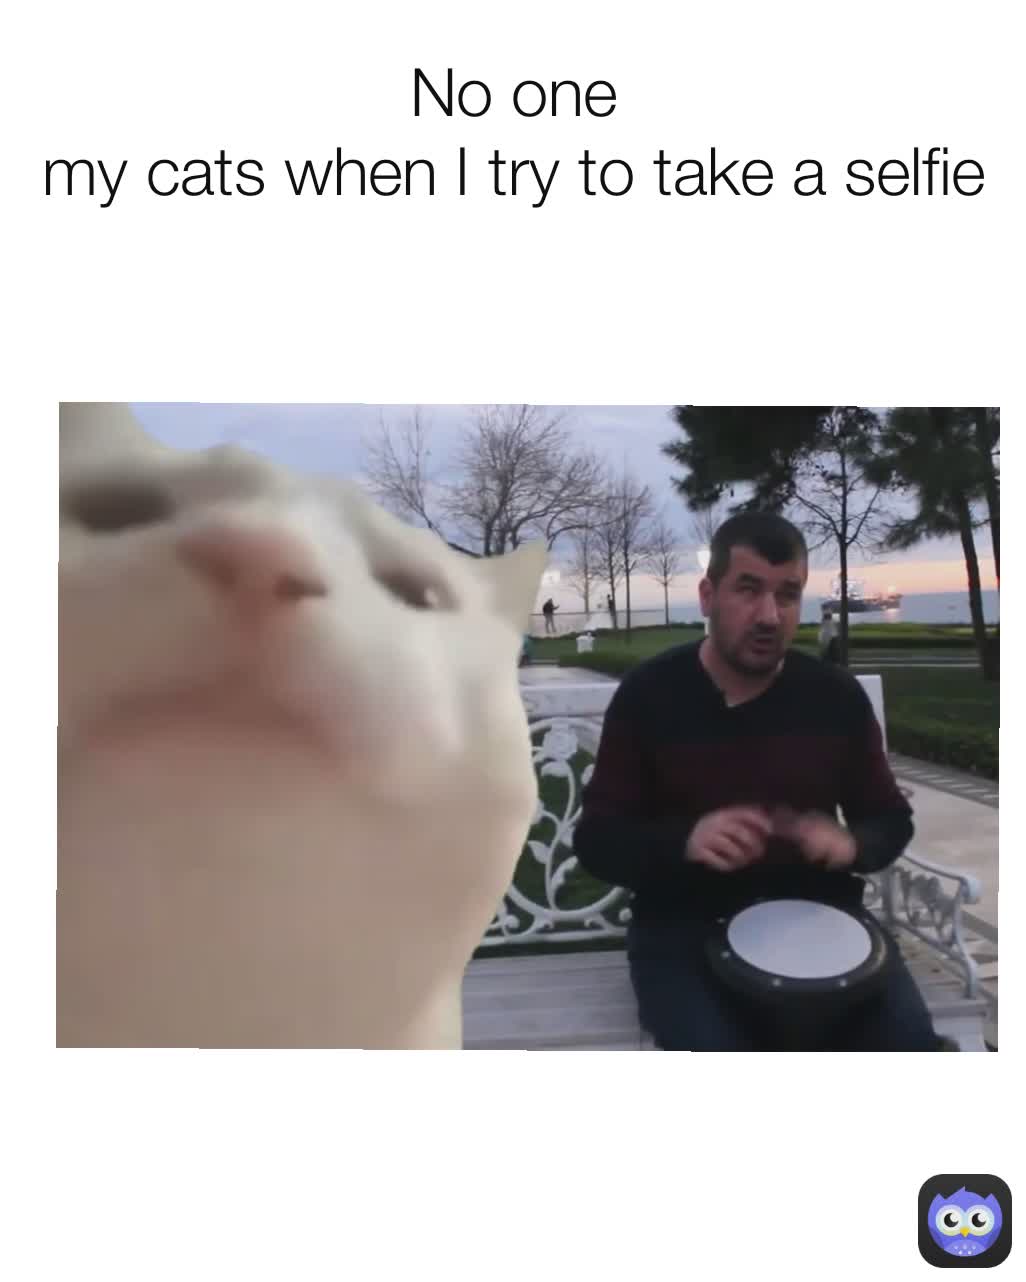 No one
my cats when I try to take a selfie